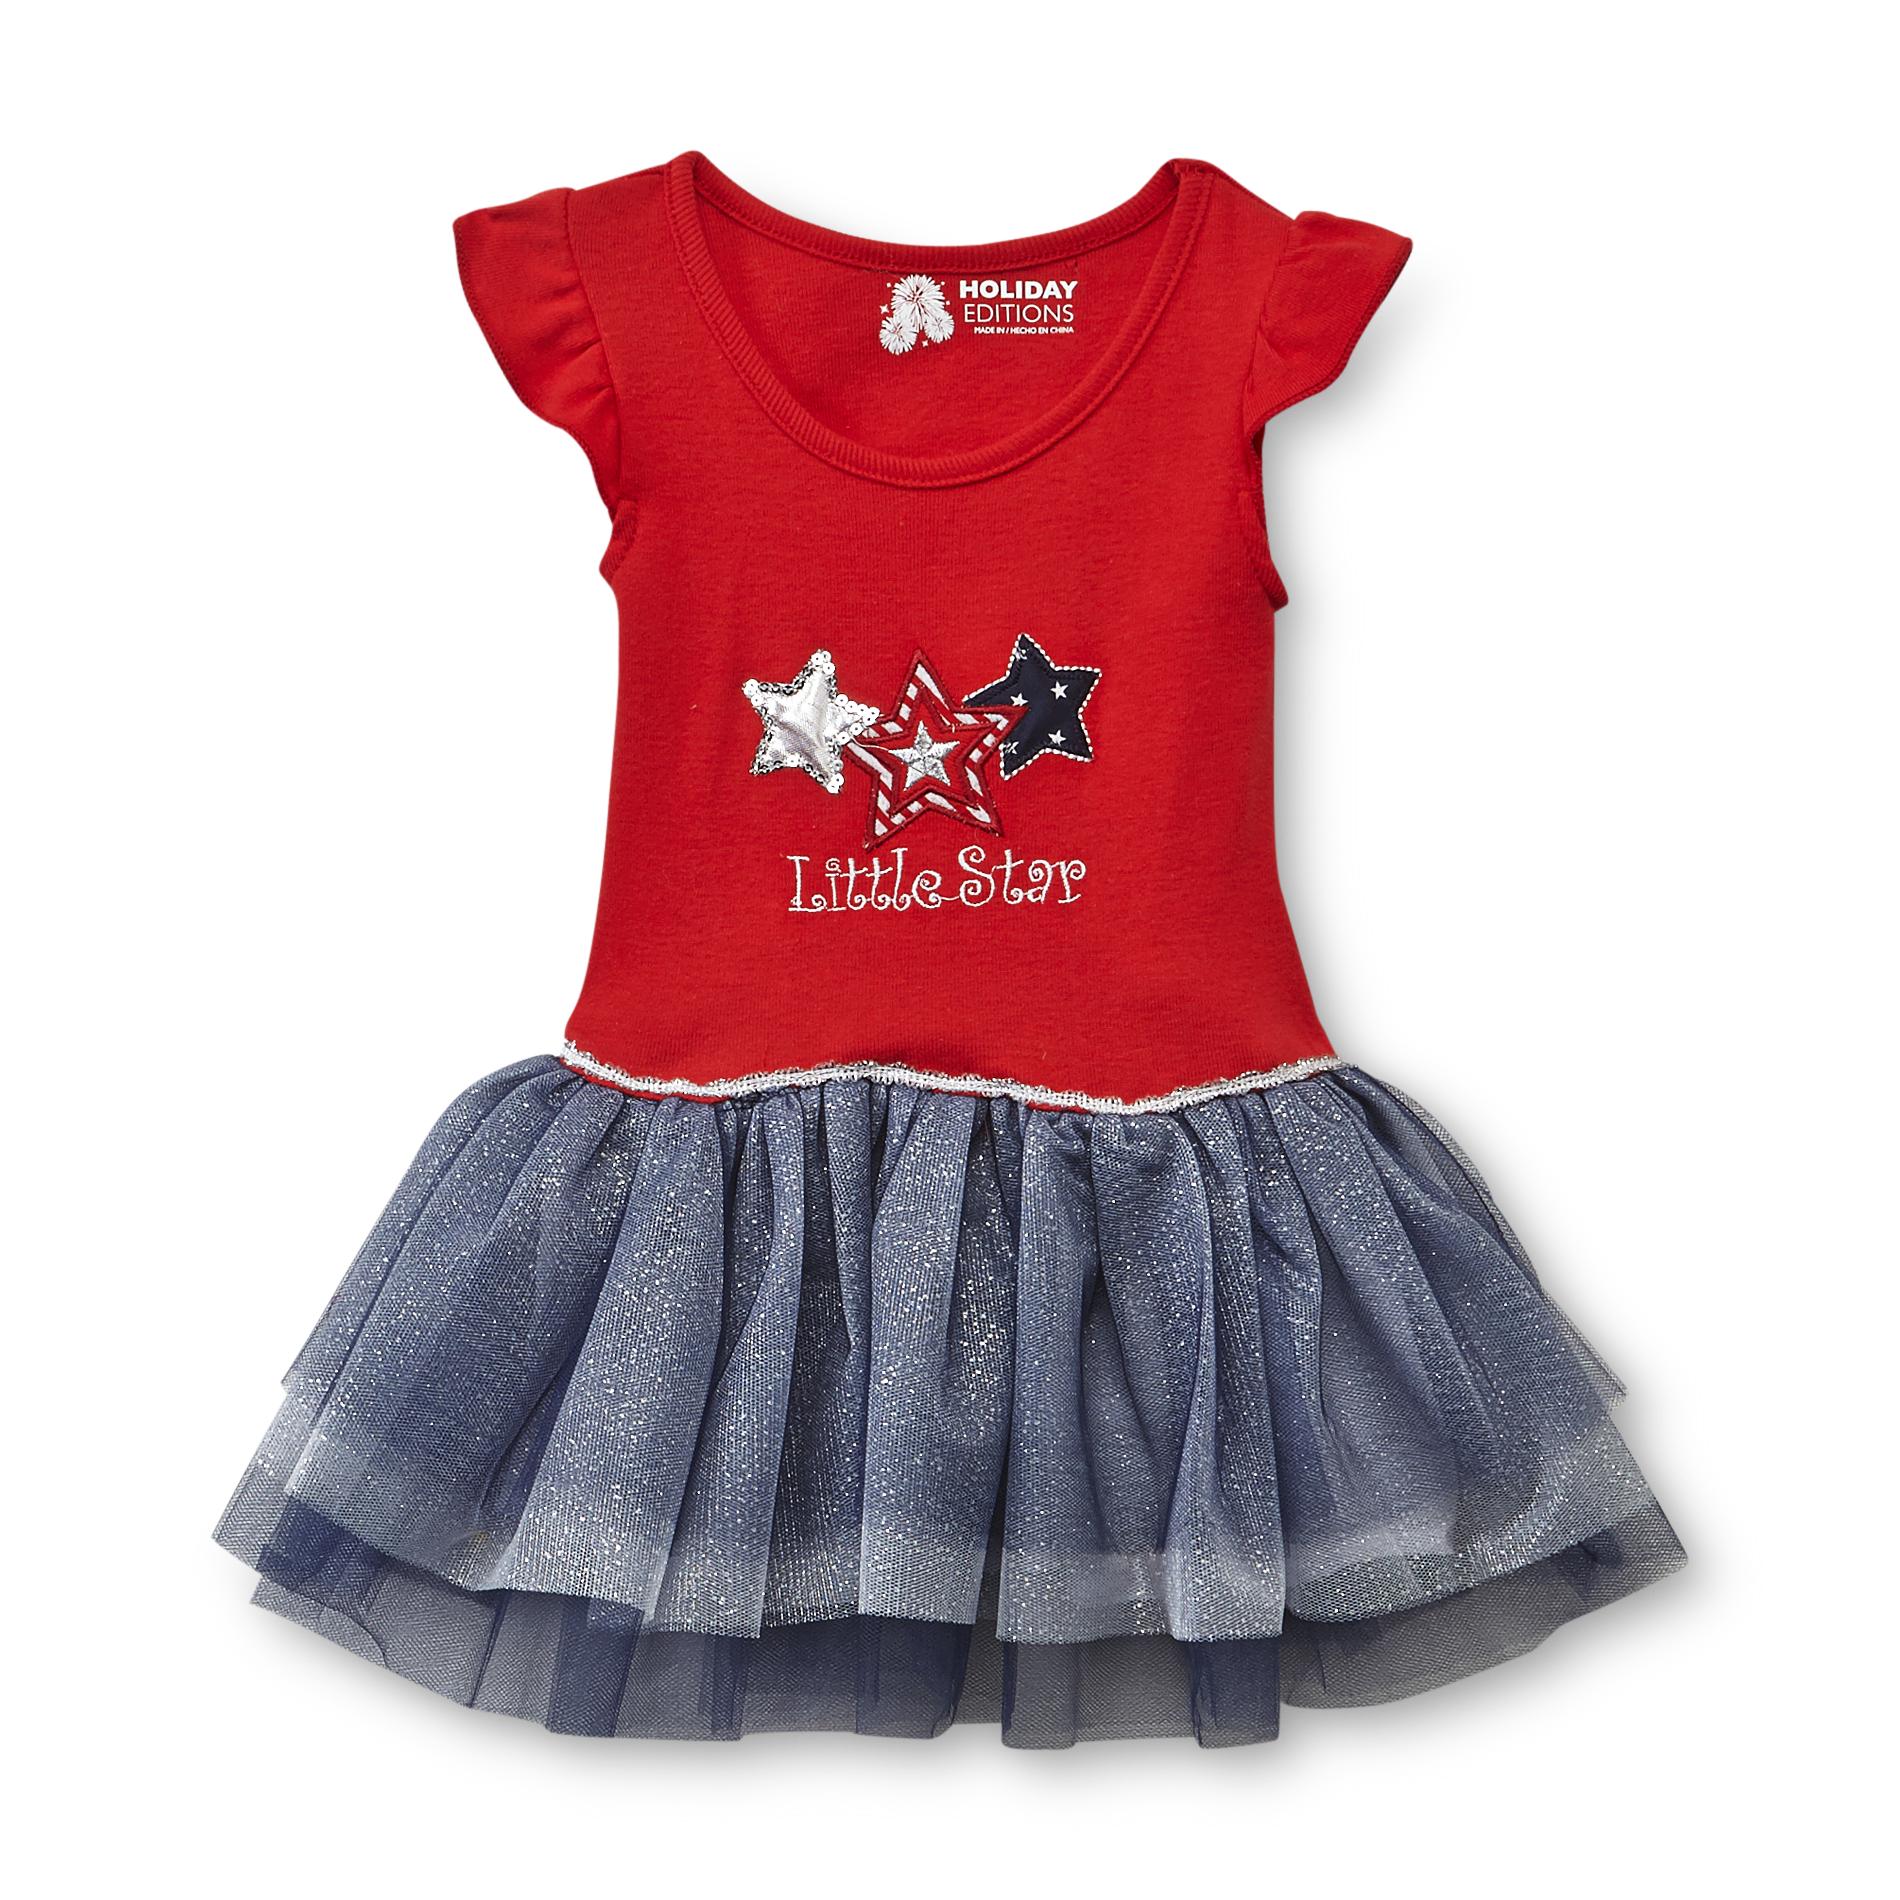 Holiday Editions Infant Girl's Tutu Dress - Little Star